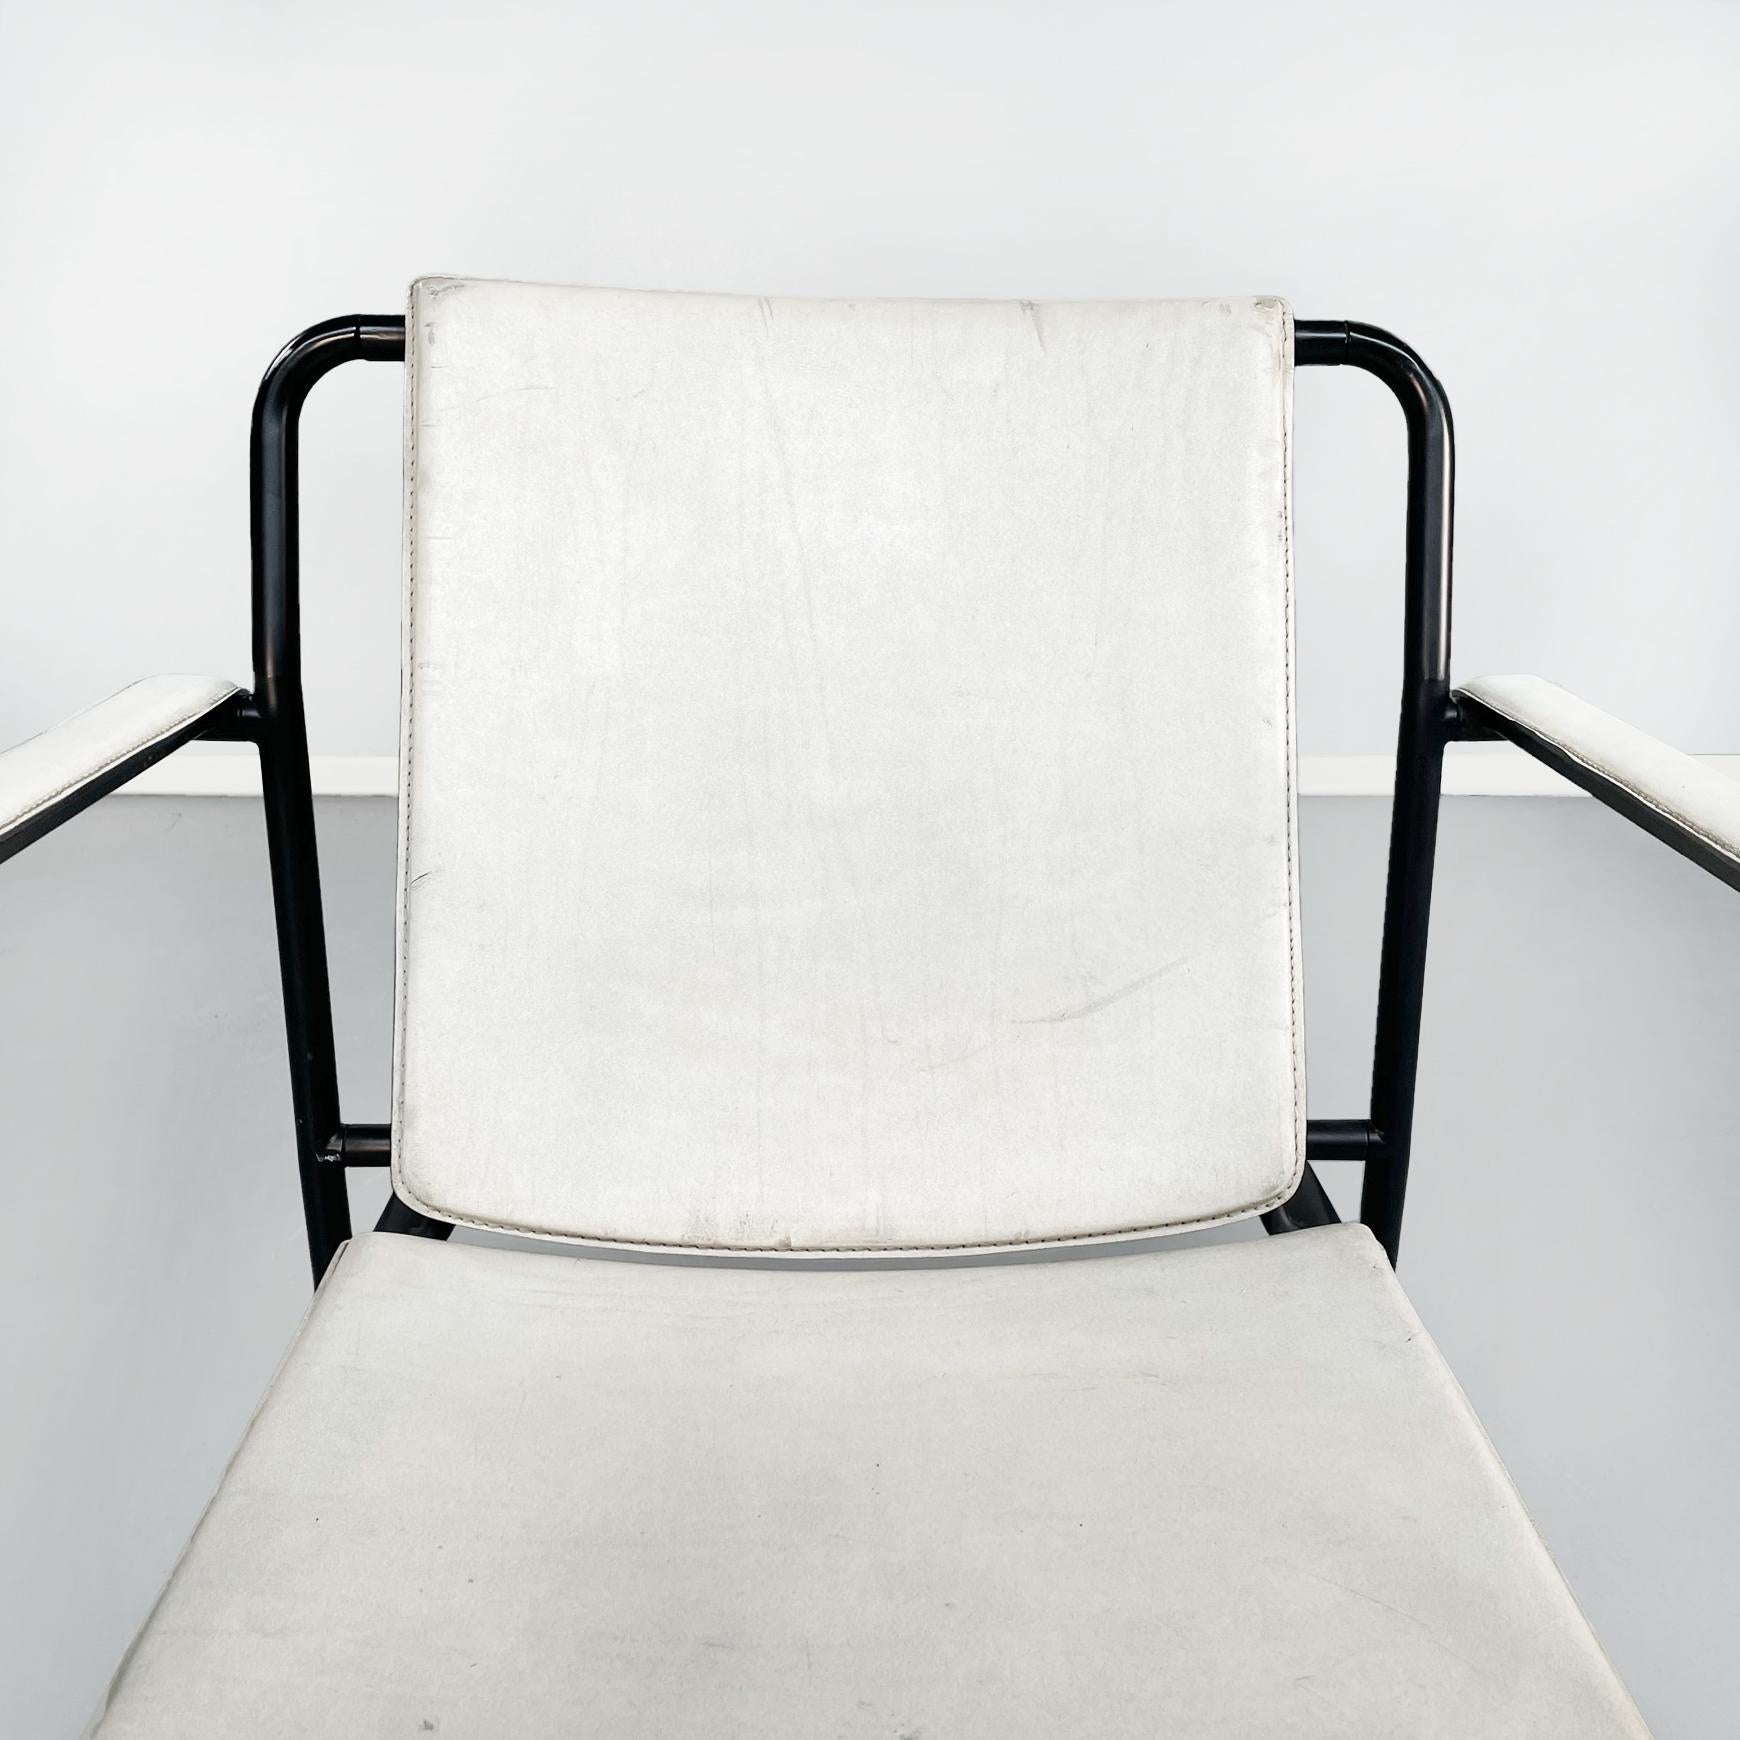 Late 20th Century Italian Mid-Century White Leather and Black Metal Chair, 1980s